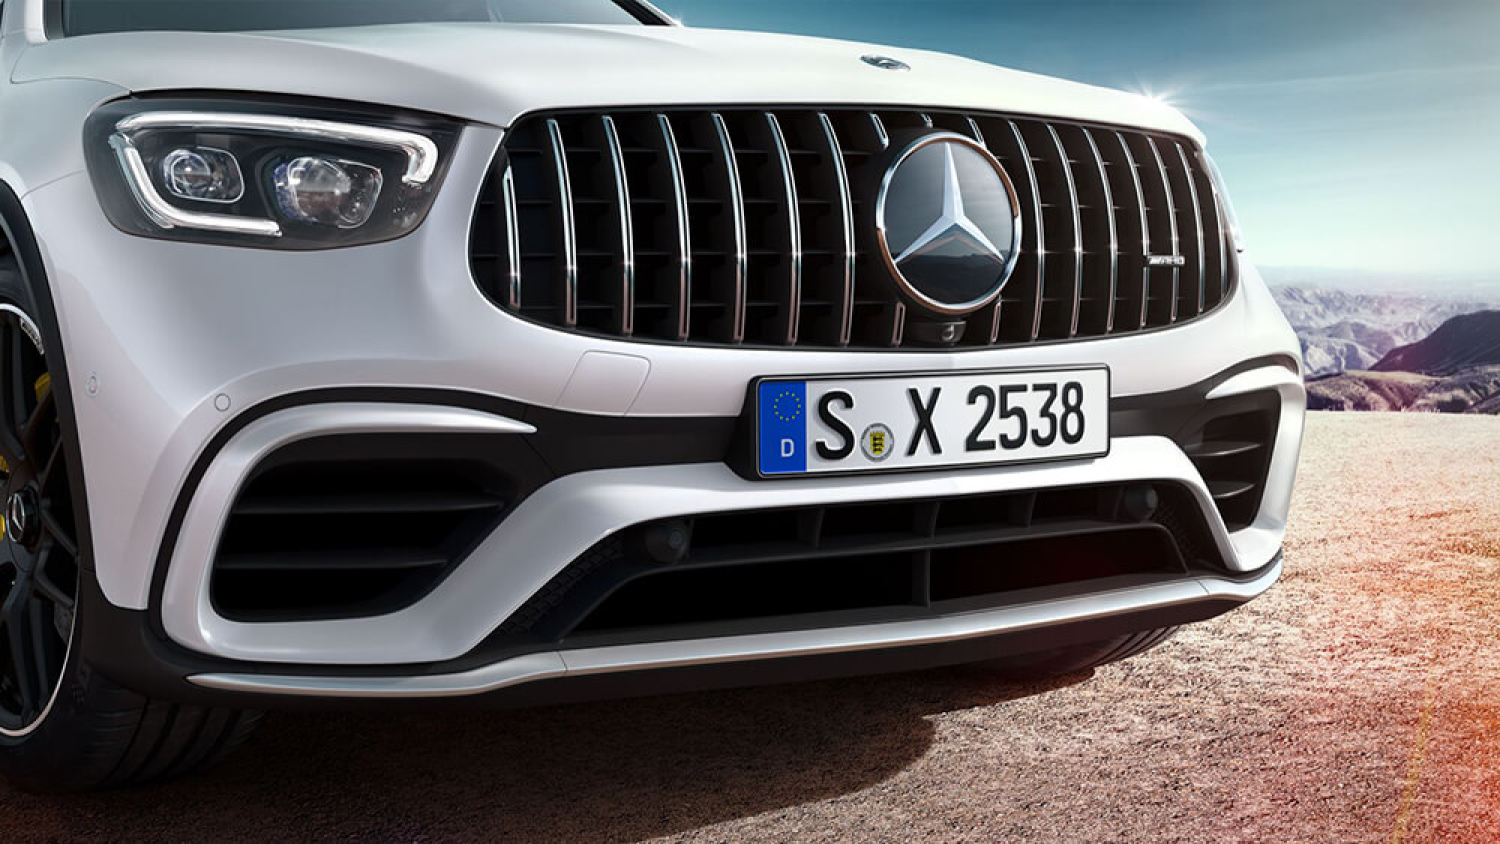 AMG - specific radiator grille